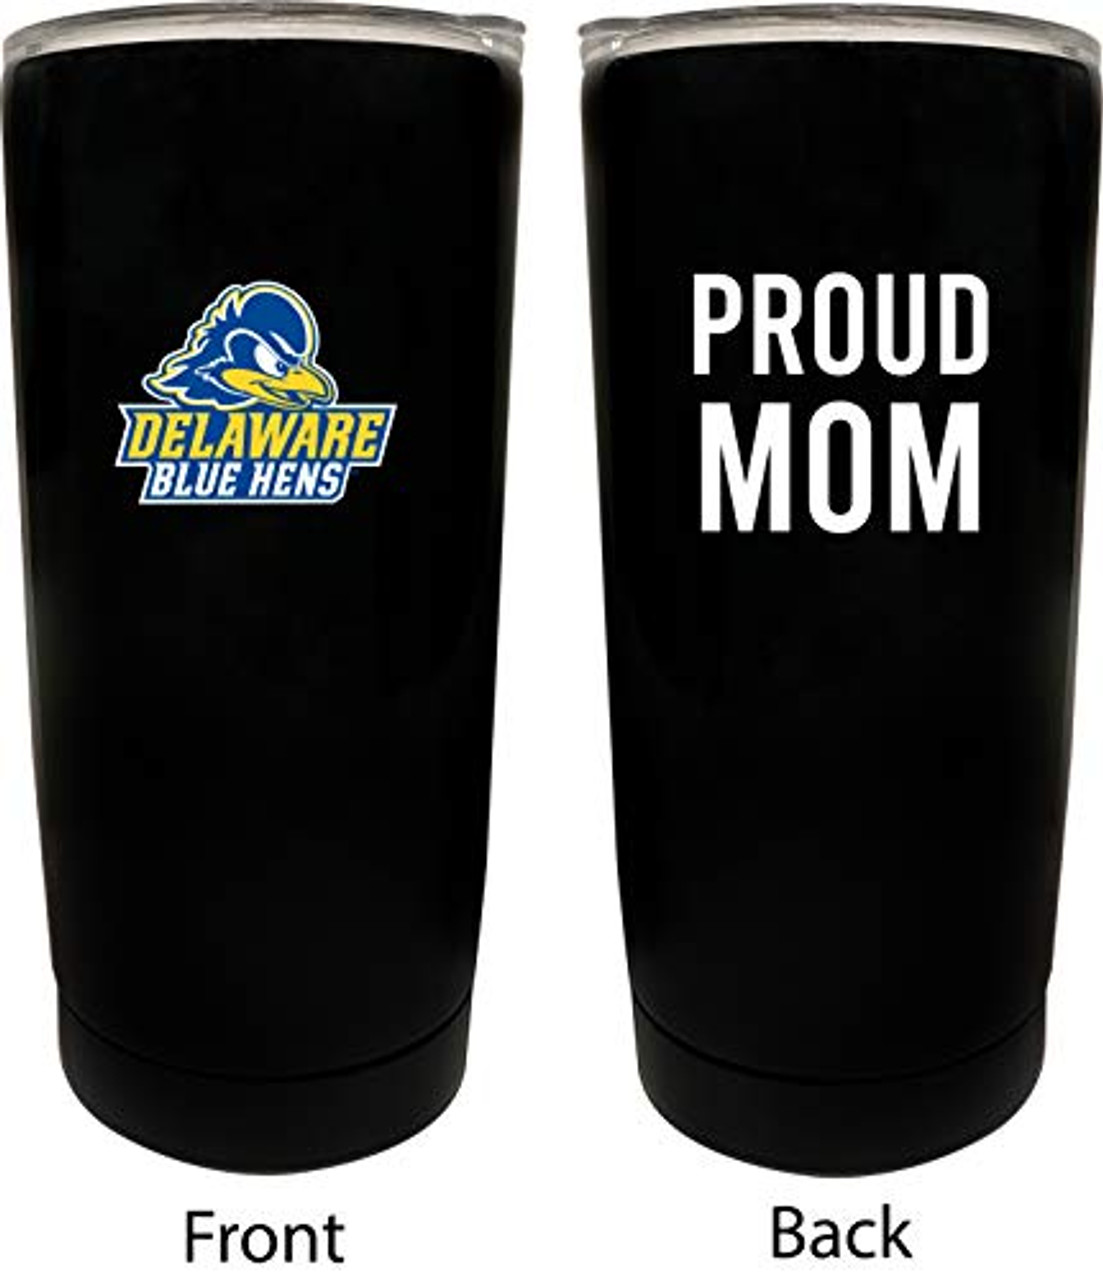 Delaware Blue Hens Proud Mom 16 oz Insulated Stainless Steel Tumblers